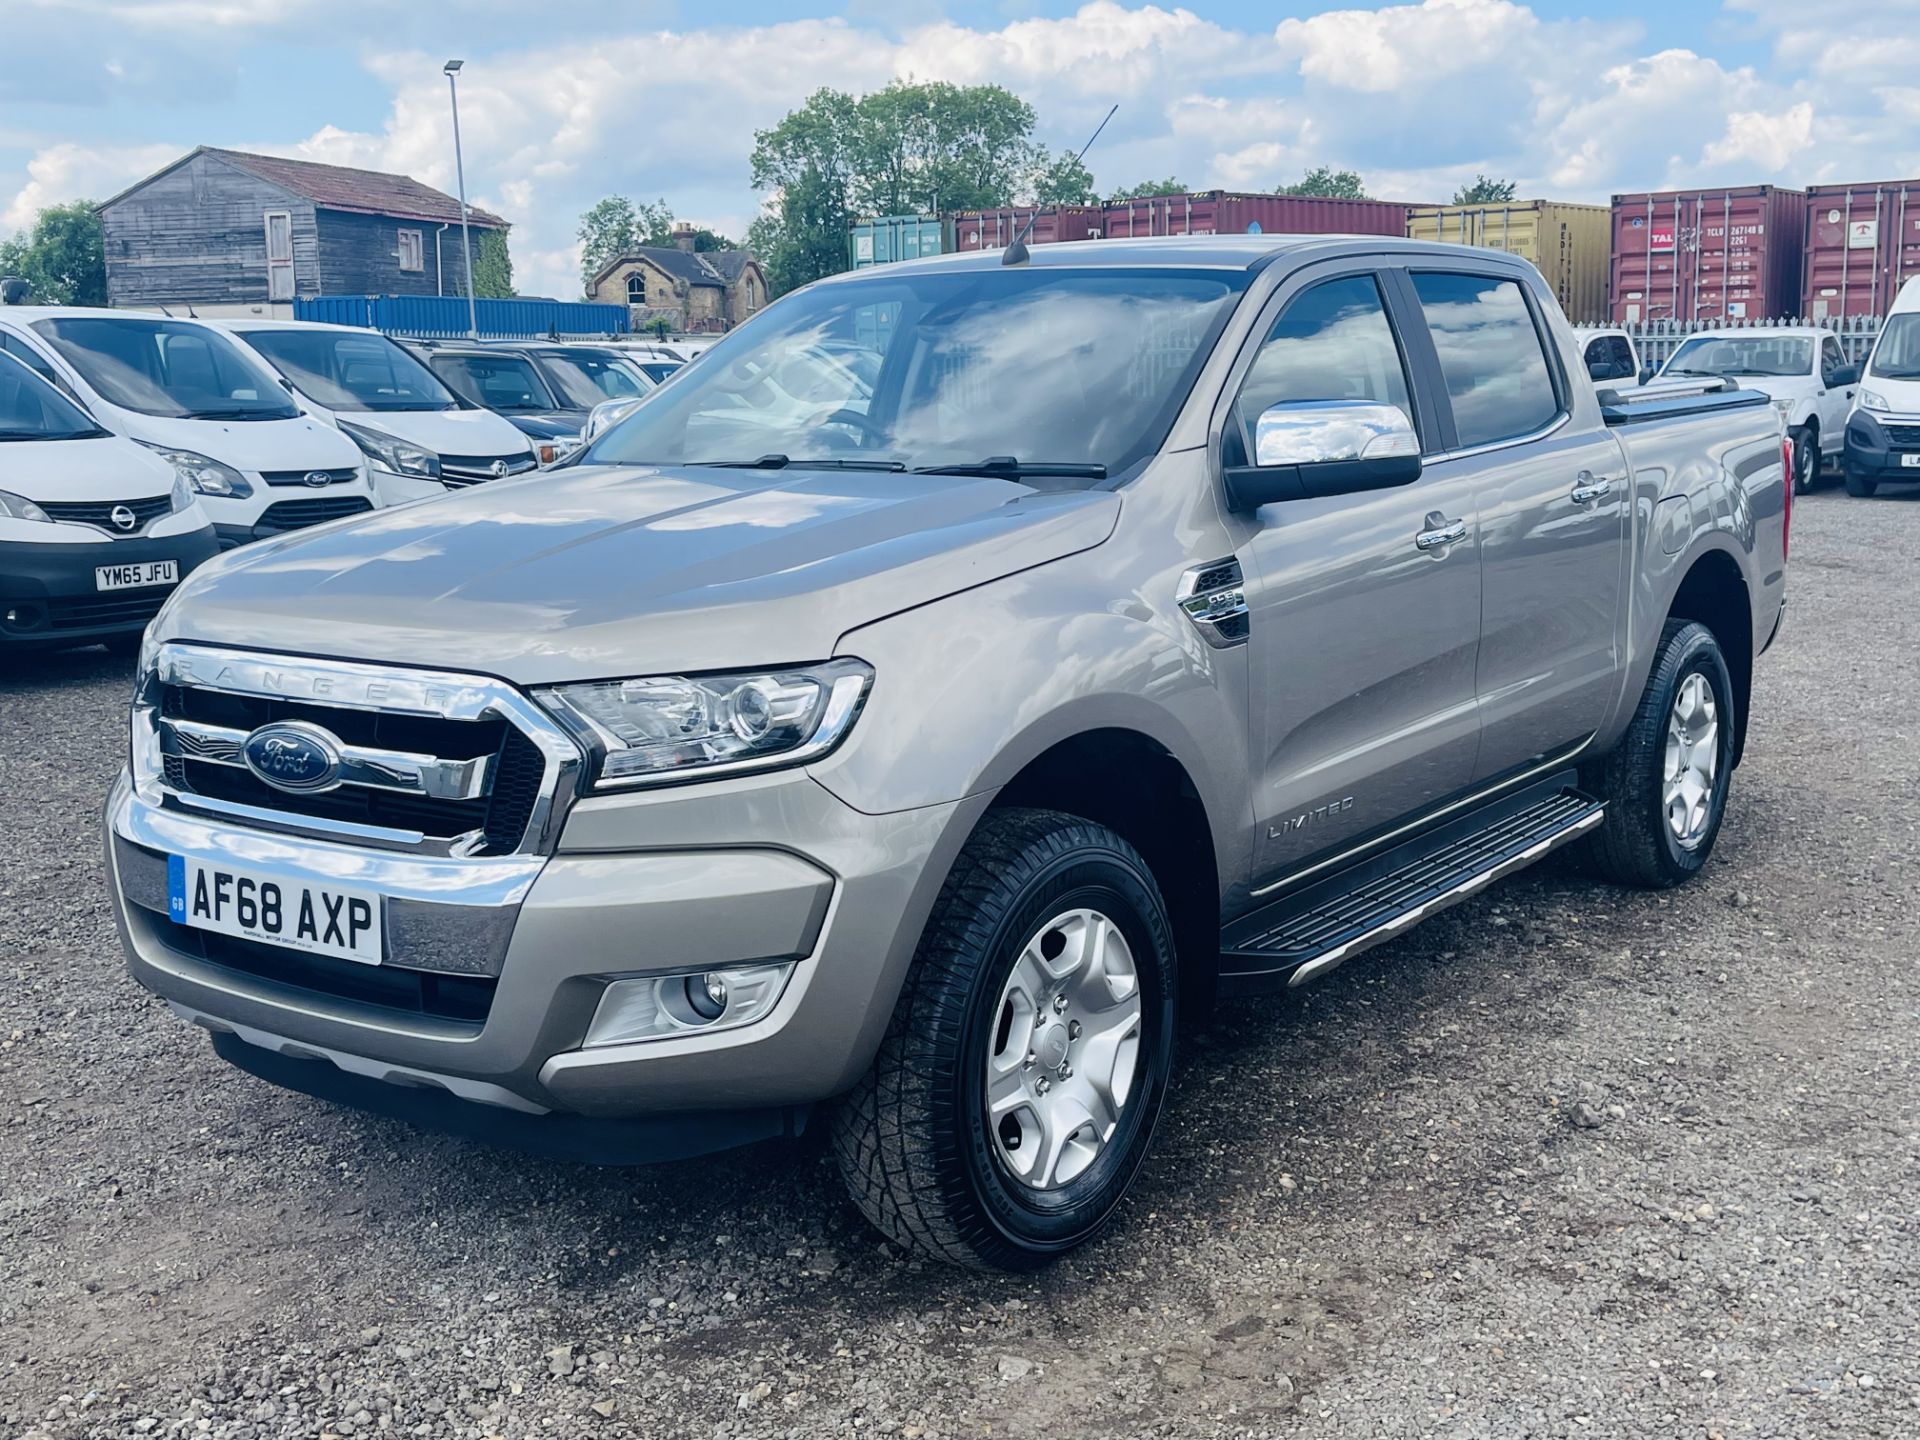 ** ON SALE ** Ford Ranger 3.2 TDCI Limited 2018 '68 Reg' Auto 4WD - Sat Nav - A/C - Euro 6 - Image 6 of 35